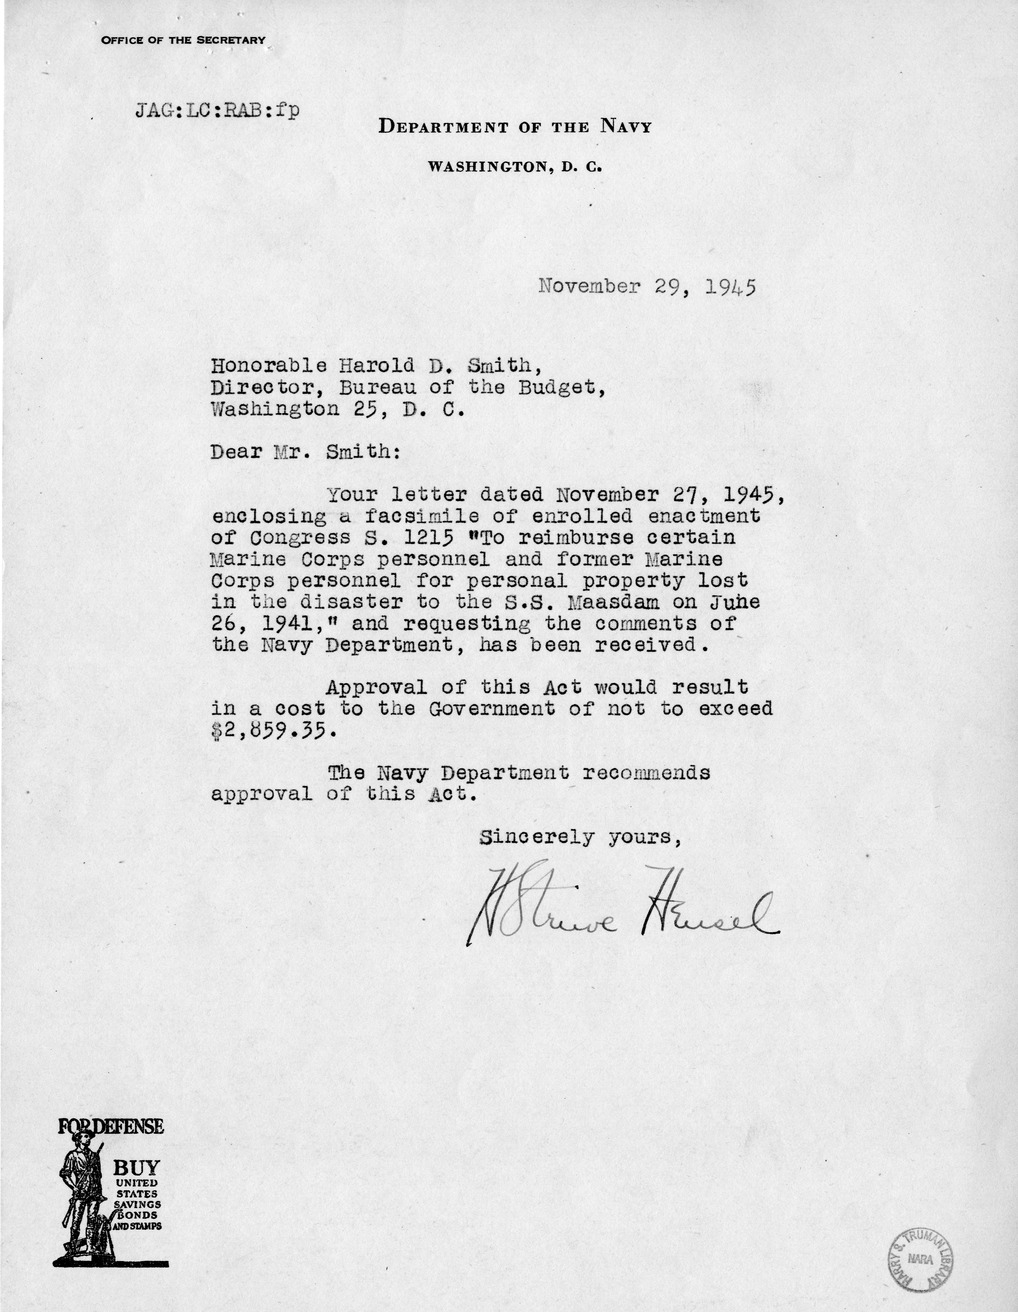 Memorandum from Frederick J. Bailey to M. C. Latta, S. 1215, To Reimburse Certain Marine Corps Personnel and Former Marine Corps Personnel for Personal Property Lost in the Disaster to the S.S. Maasdam on June 26, 1941, with Attachments